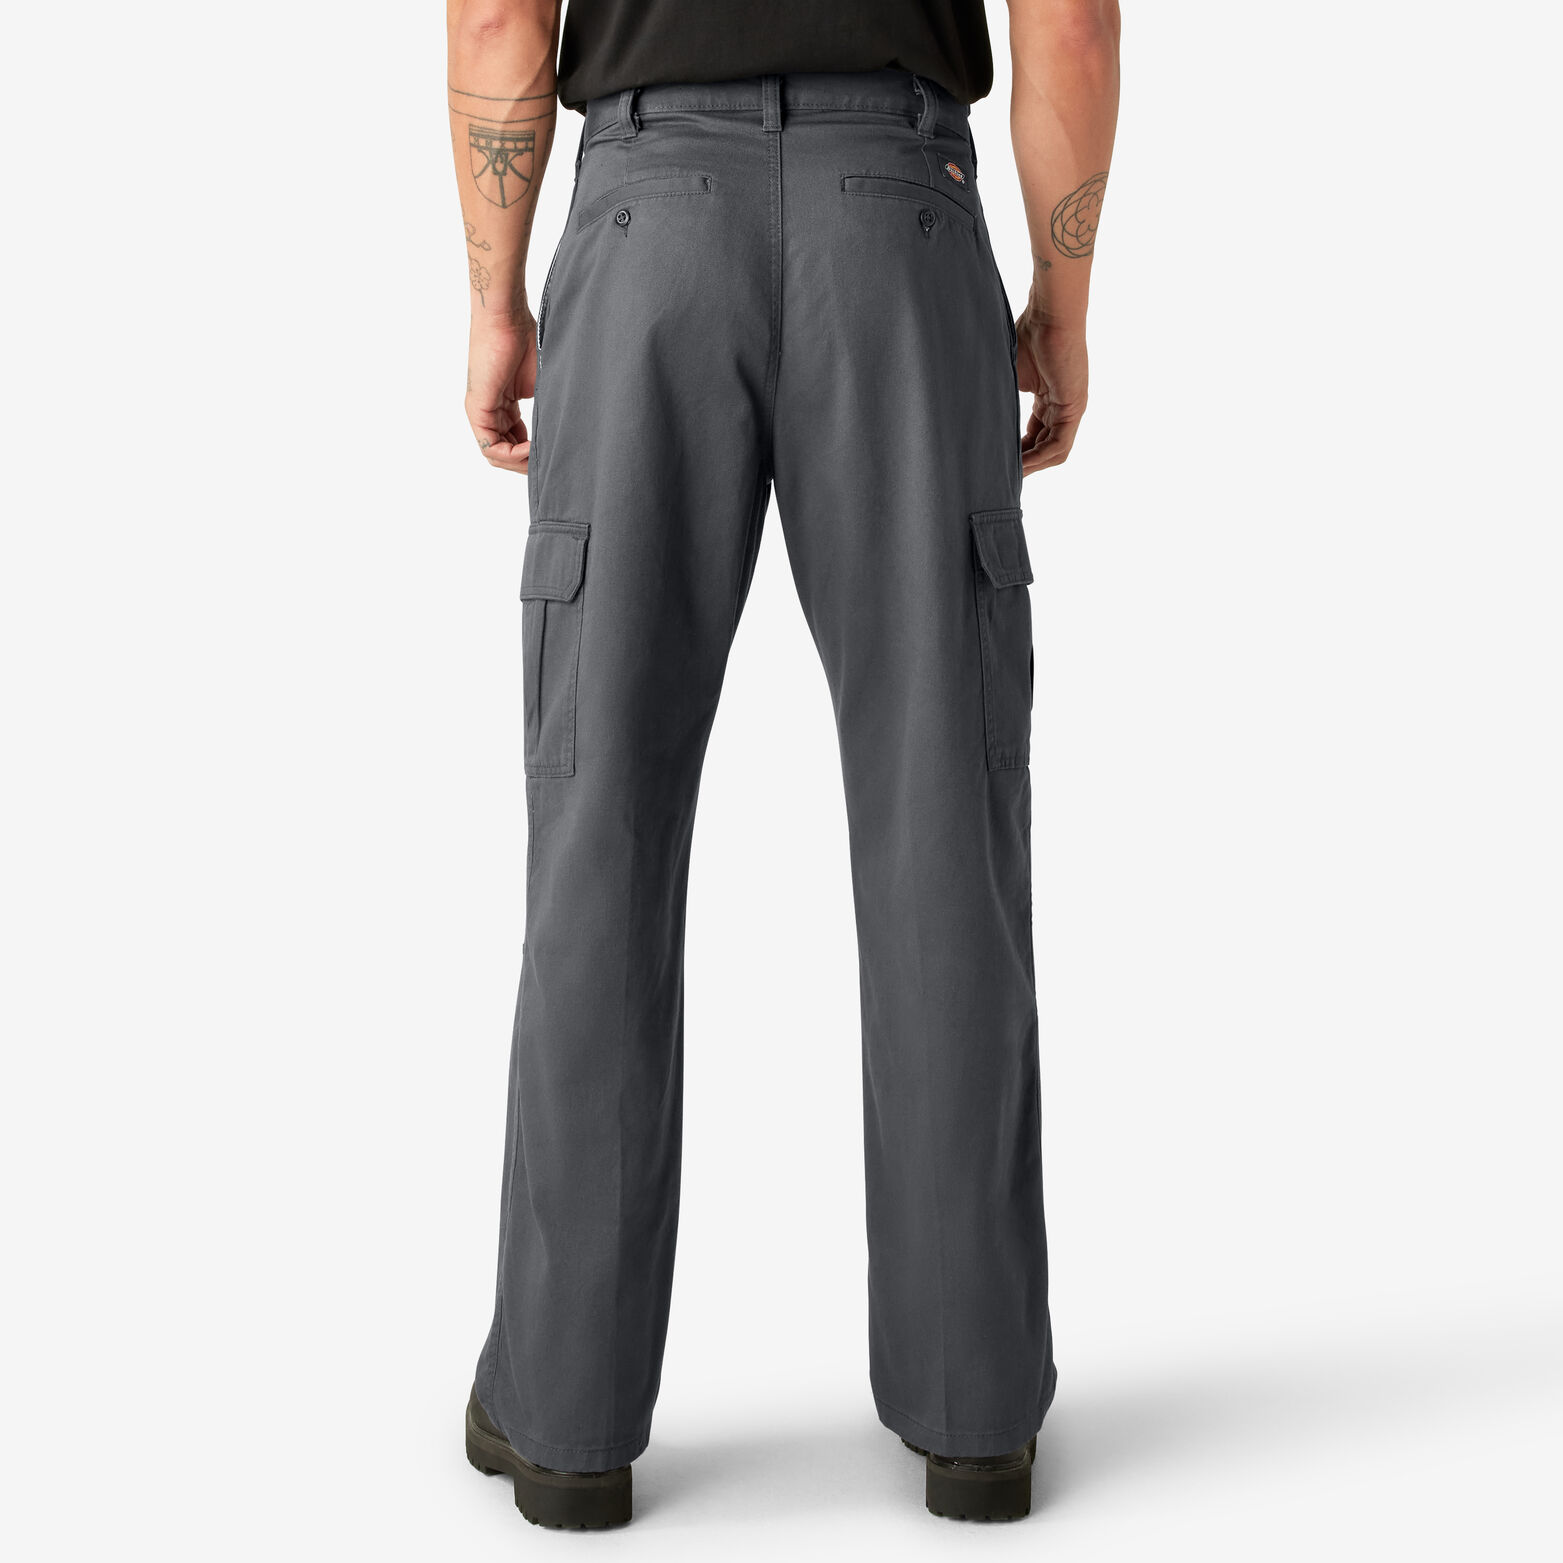 Loose Fit Cargo Pants For Men Rinsed Charcoal Gray | Dickies